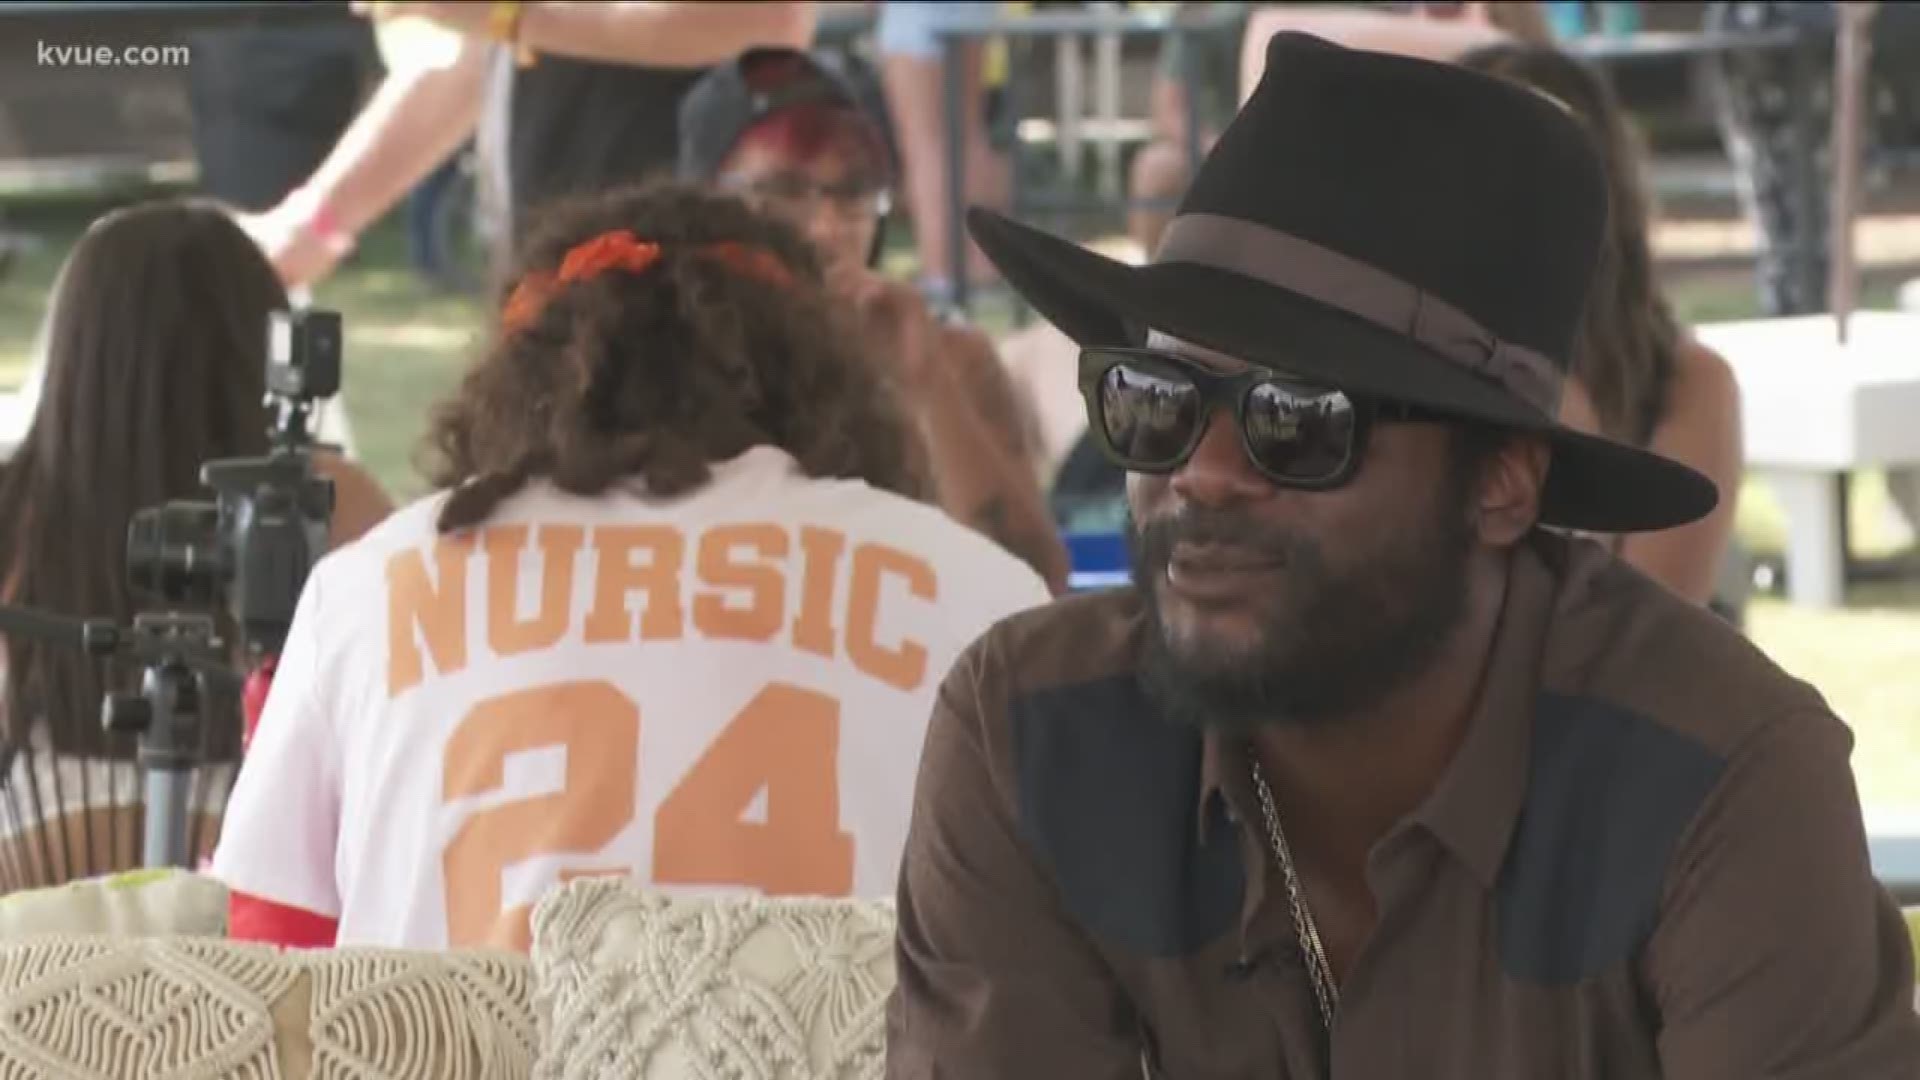 KVUE's Brittany Flowers sat down with Gary Clark Jr. and Finneas at weekend one of the festival.